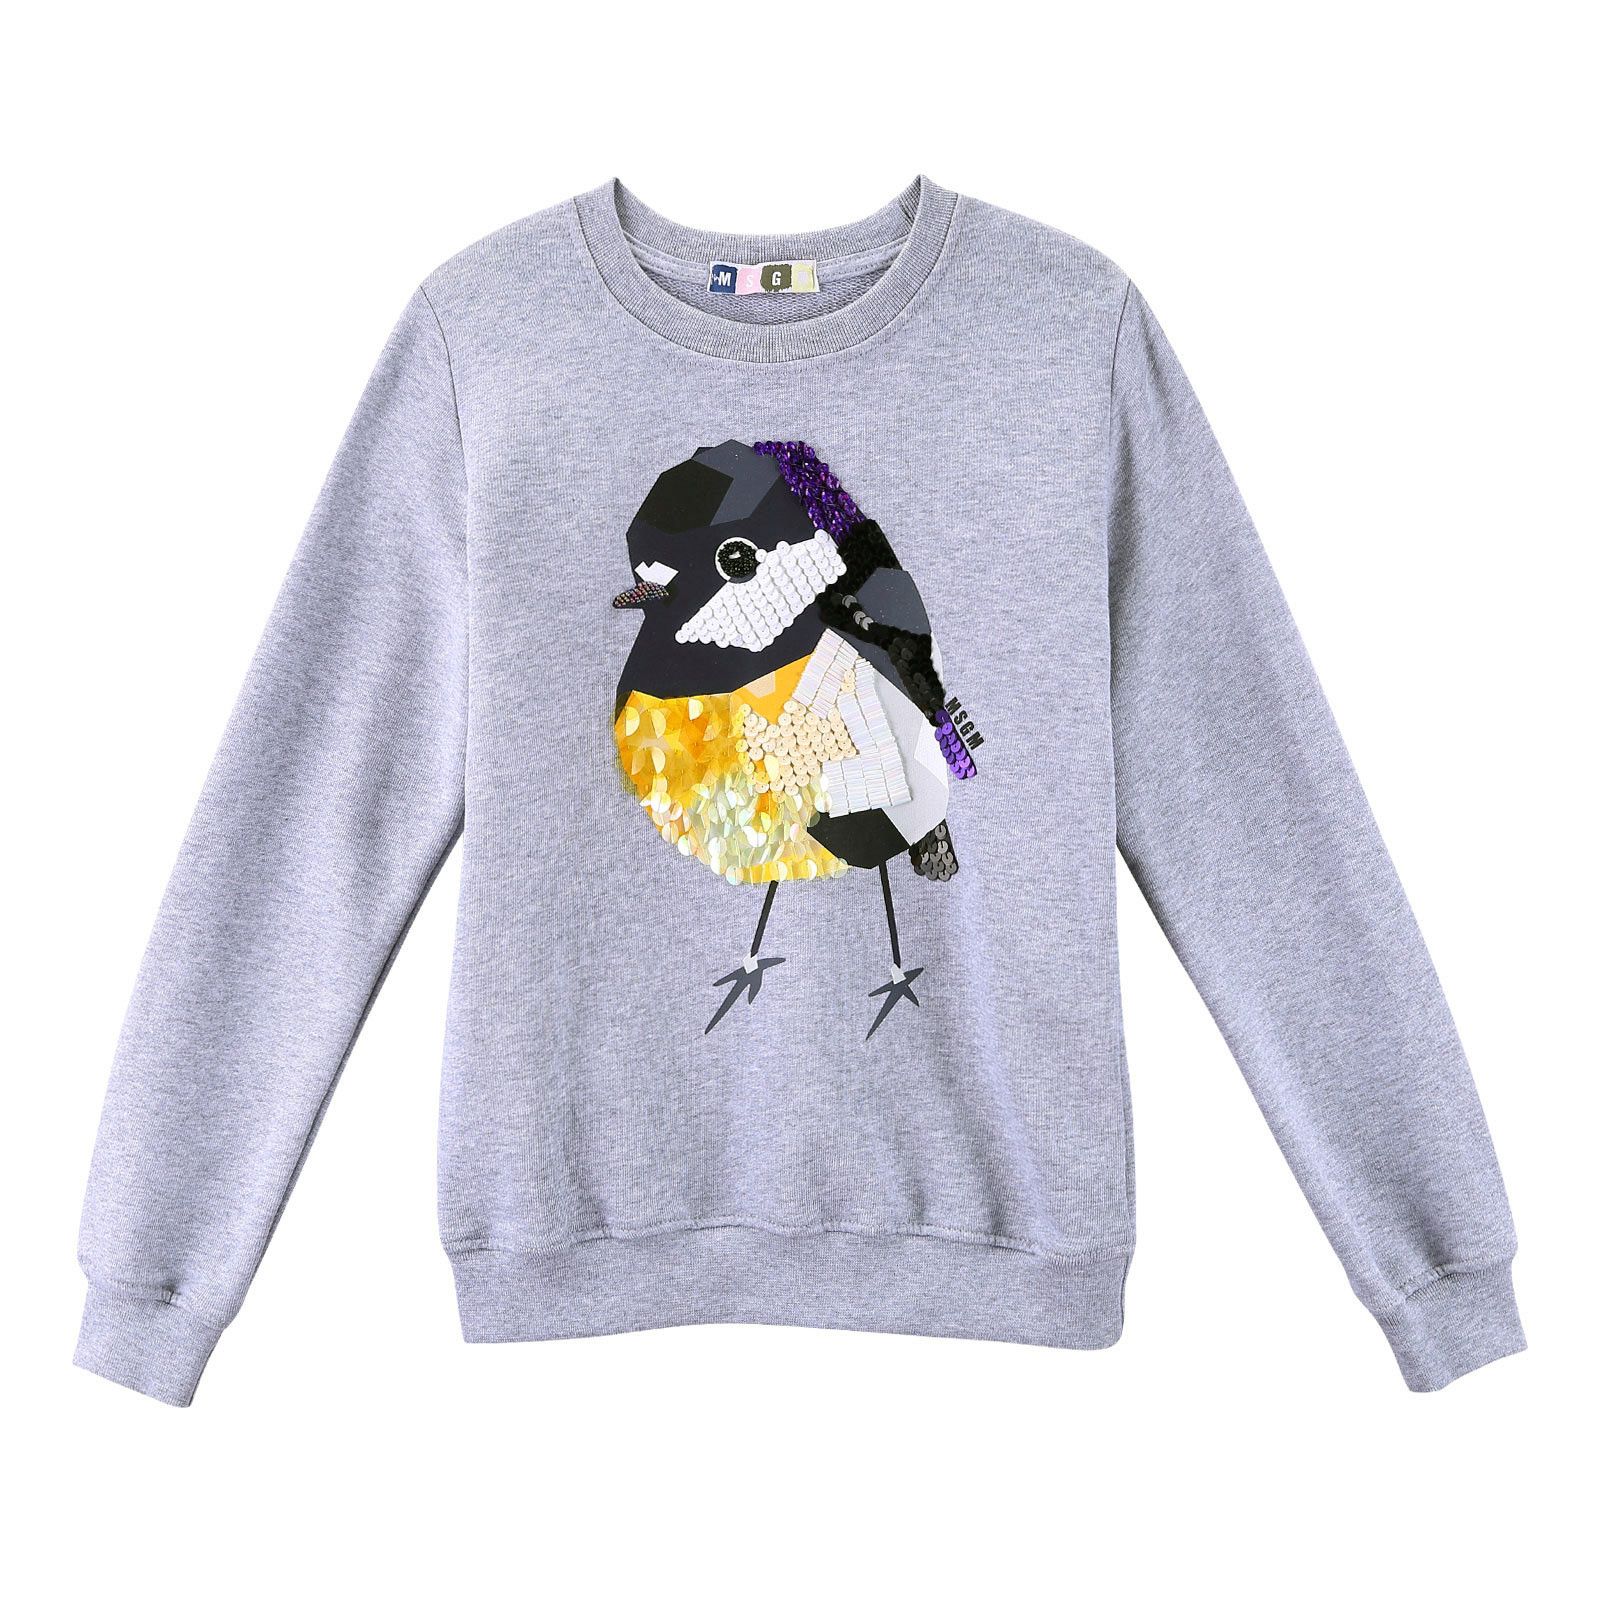 Girls Grey Cotton Sweater With Multicolor Chick Print&Patch Trims - CÉMAROSE | Children's Fashion Store